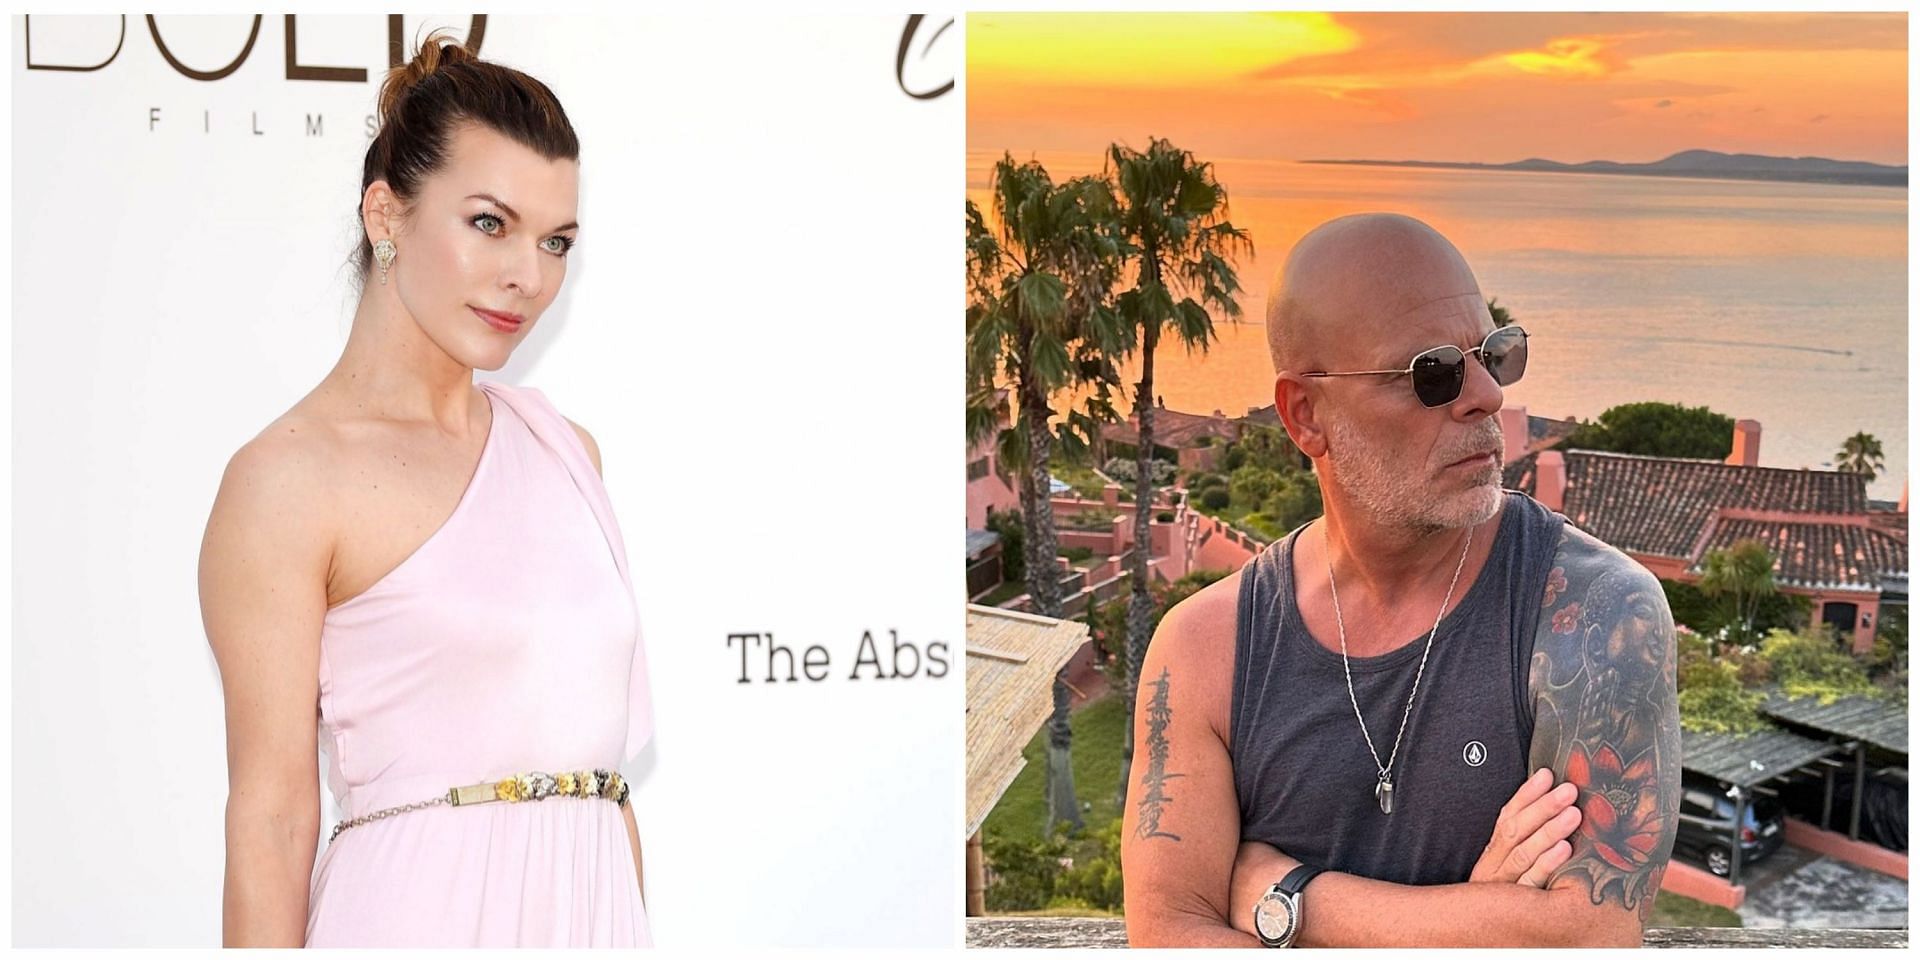 Milla Jovovich is opening about her relationship with Bruce Willis